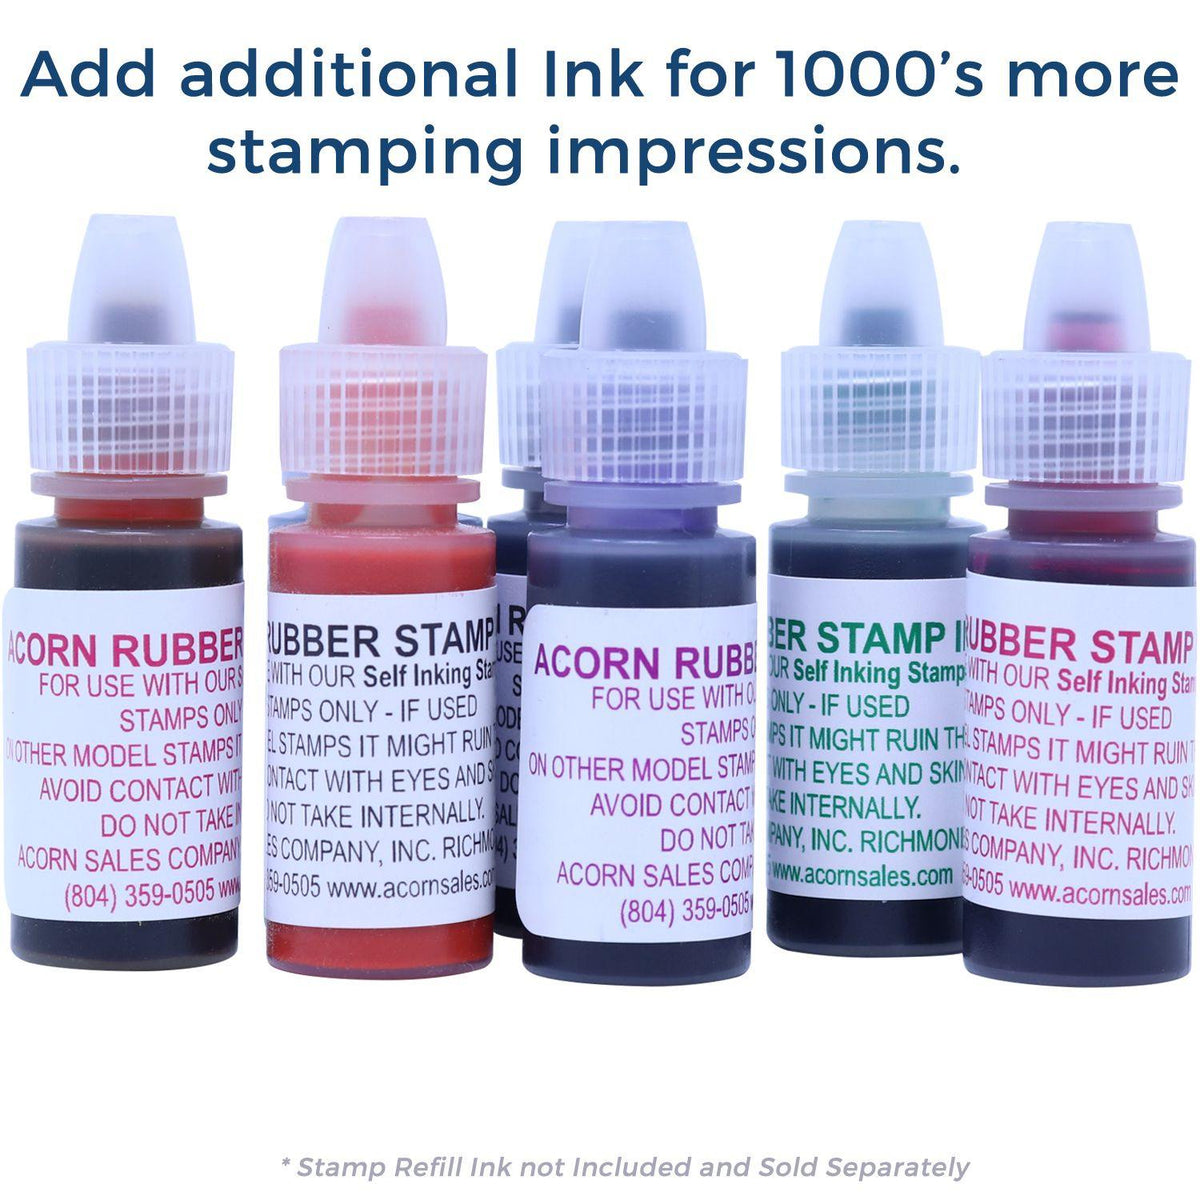 Refill Inks for Large Pre-Inked Entered Outline Stamp Available